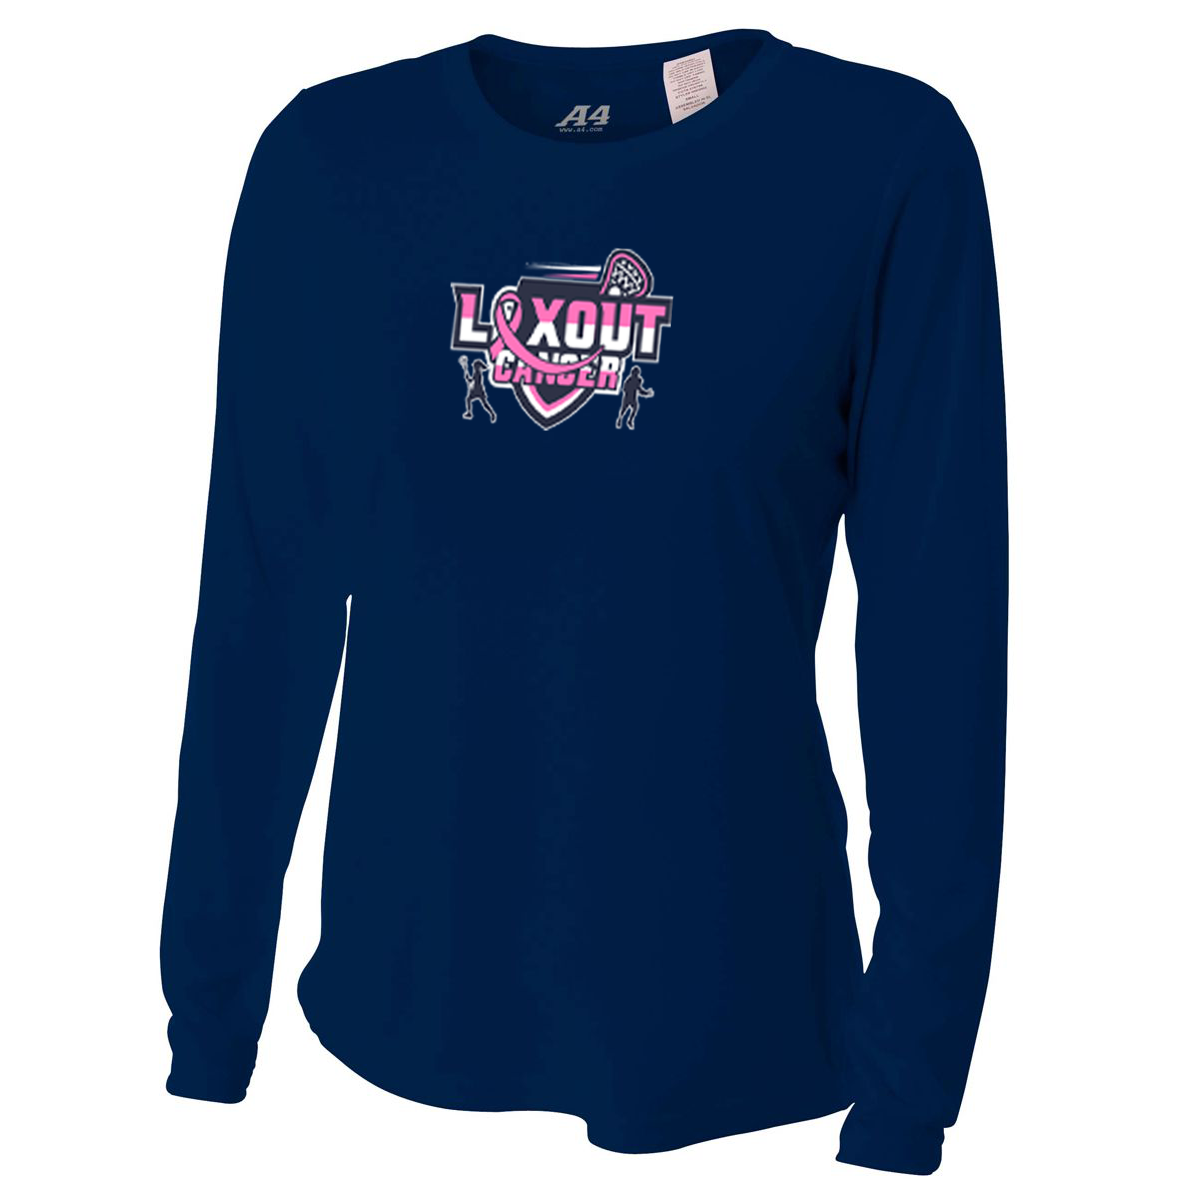 LaxOut Cancer Women's Long Sleeve Performance Crew